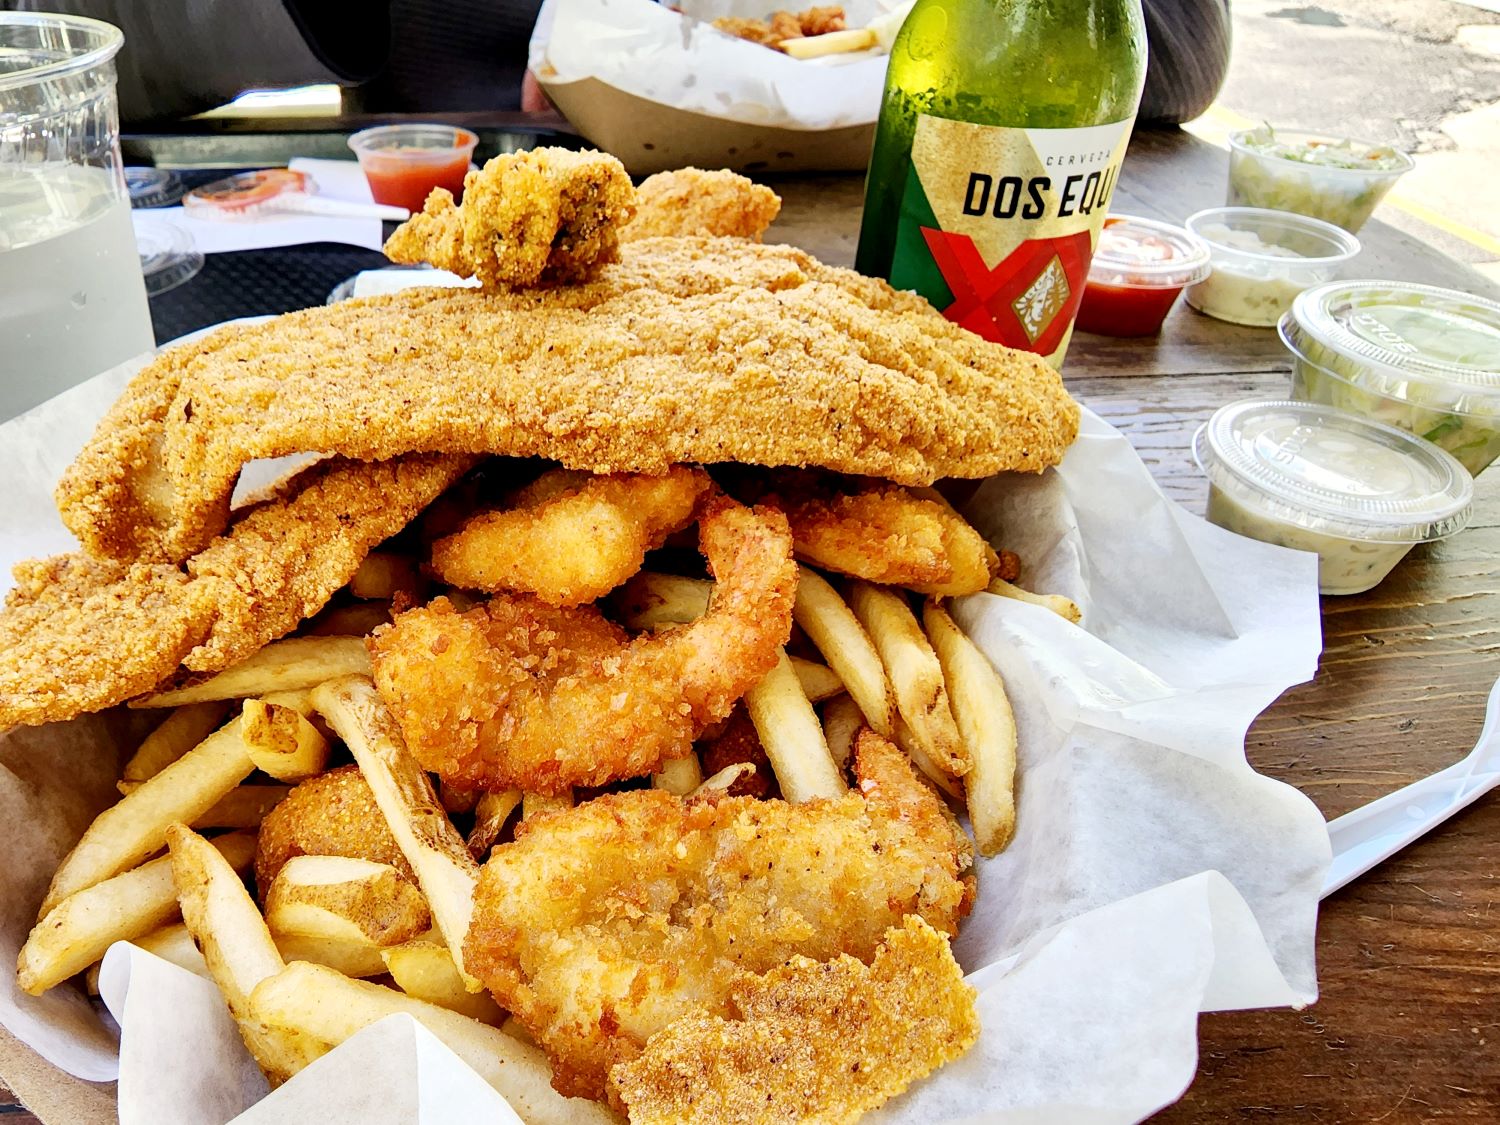 A Trip to Shrimp 'N Stuff - Charlotte's Texas Hill Country